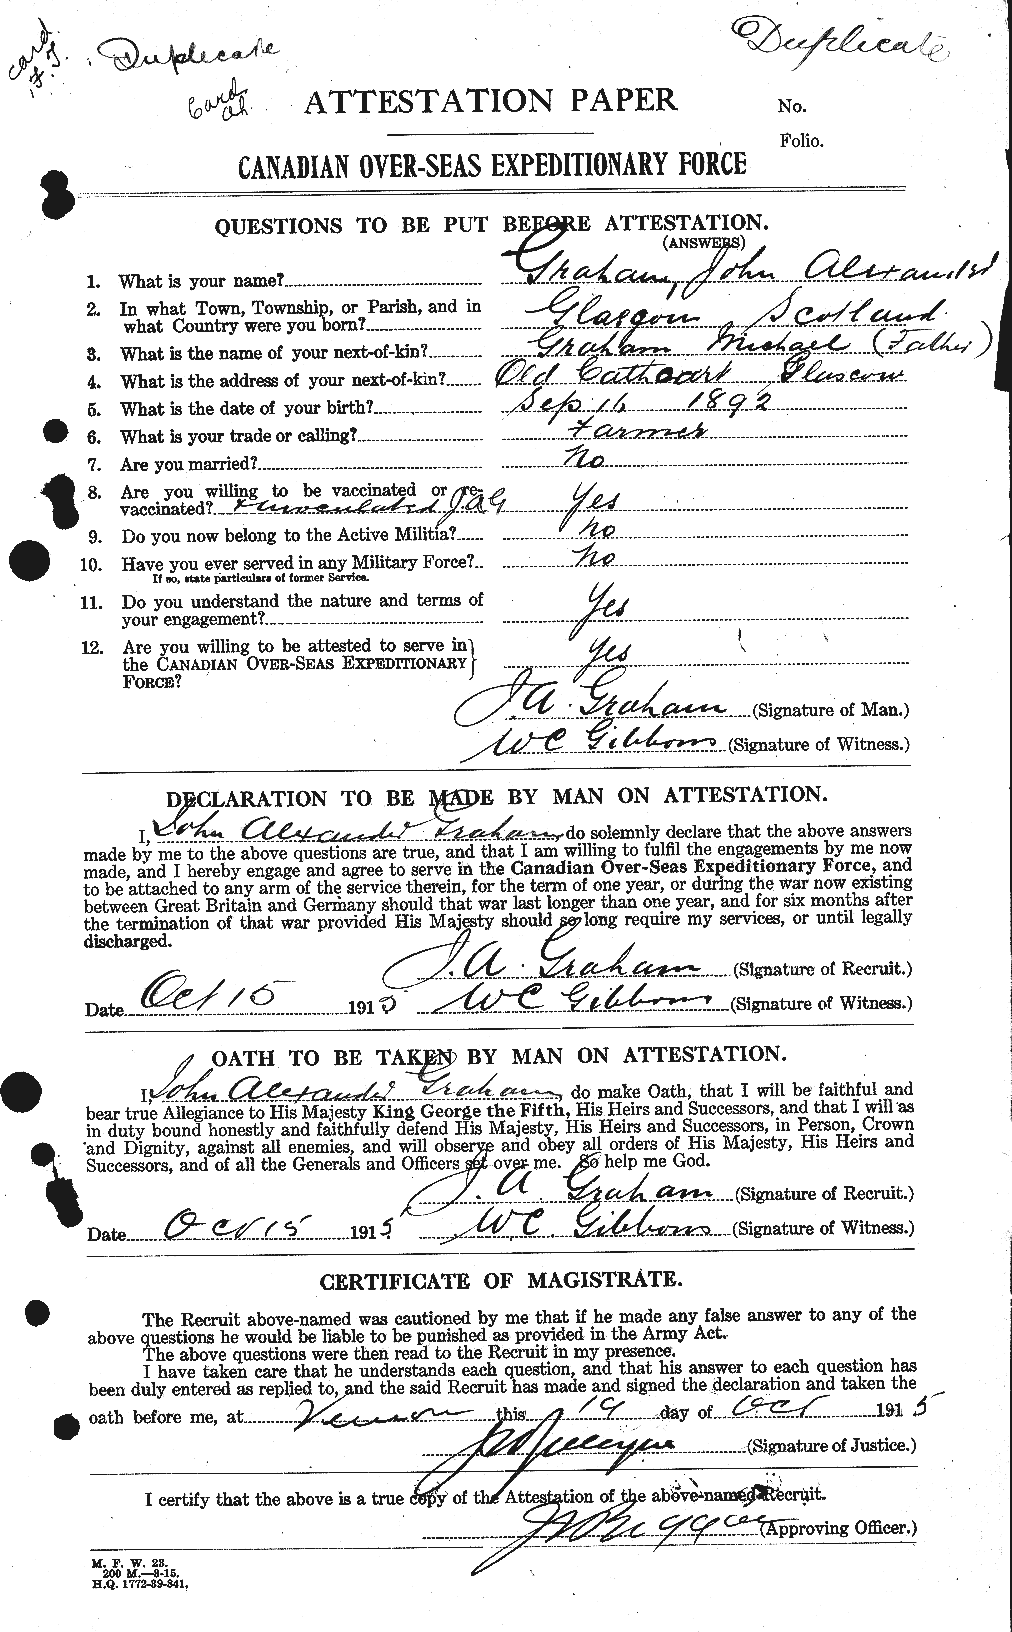 Personnel Records of the First World War - CEF 359153a